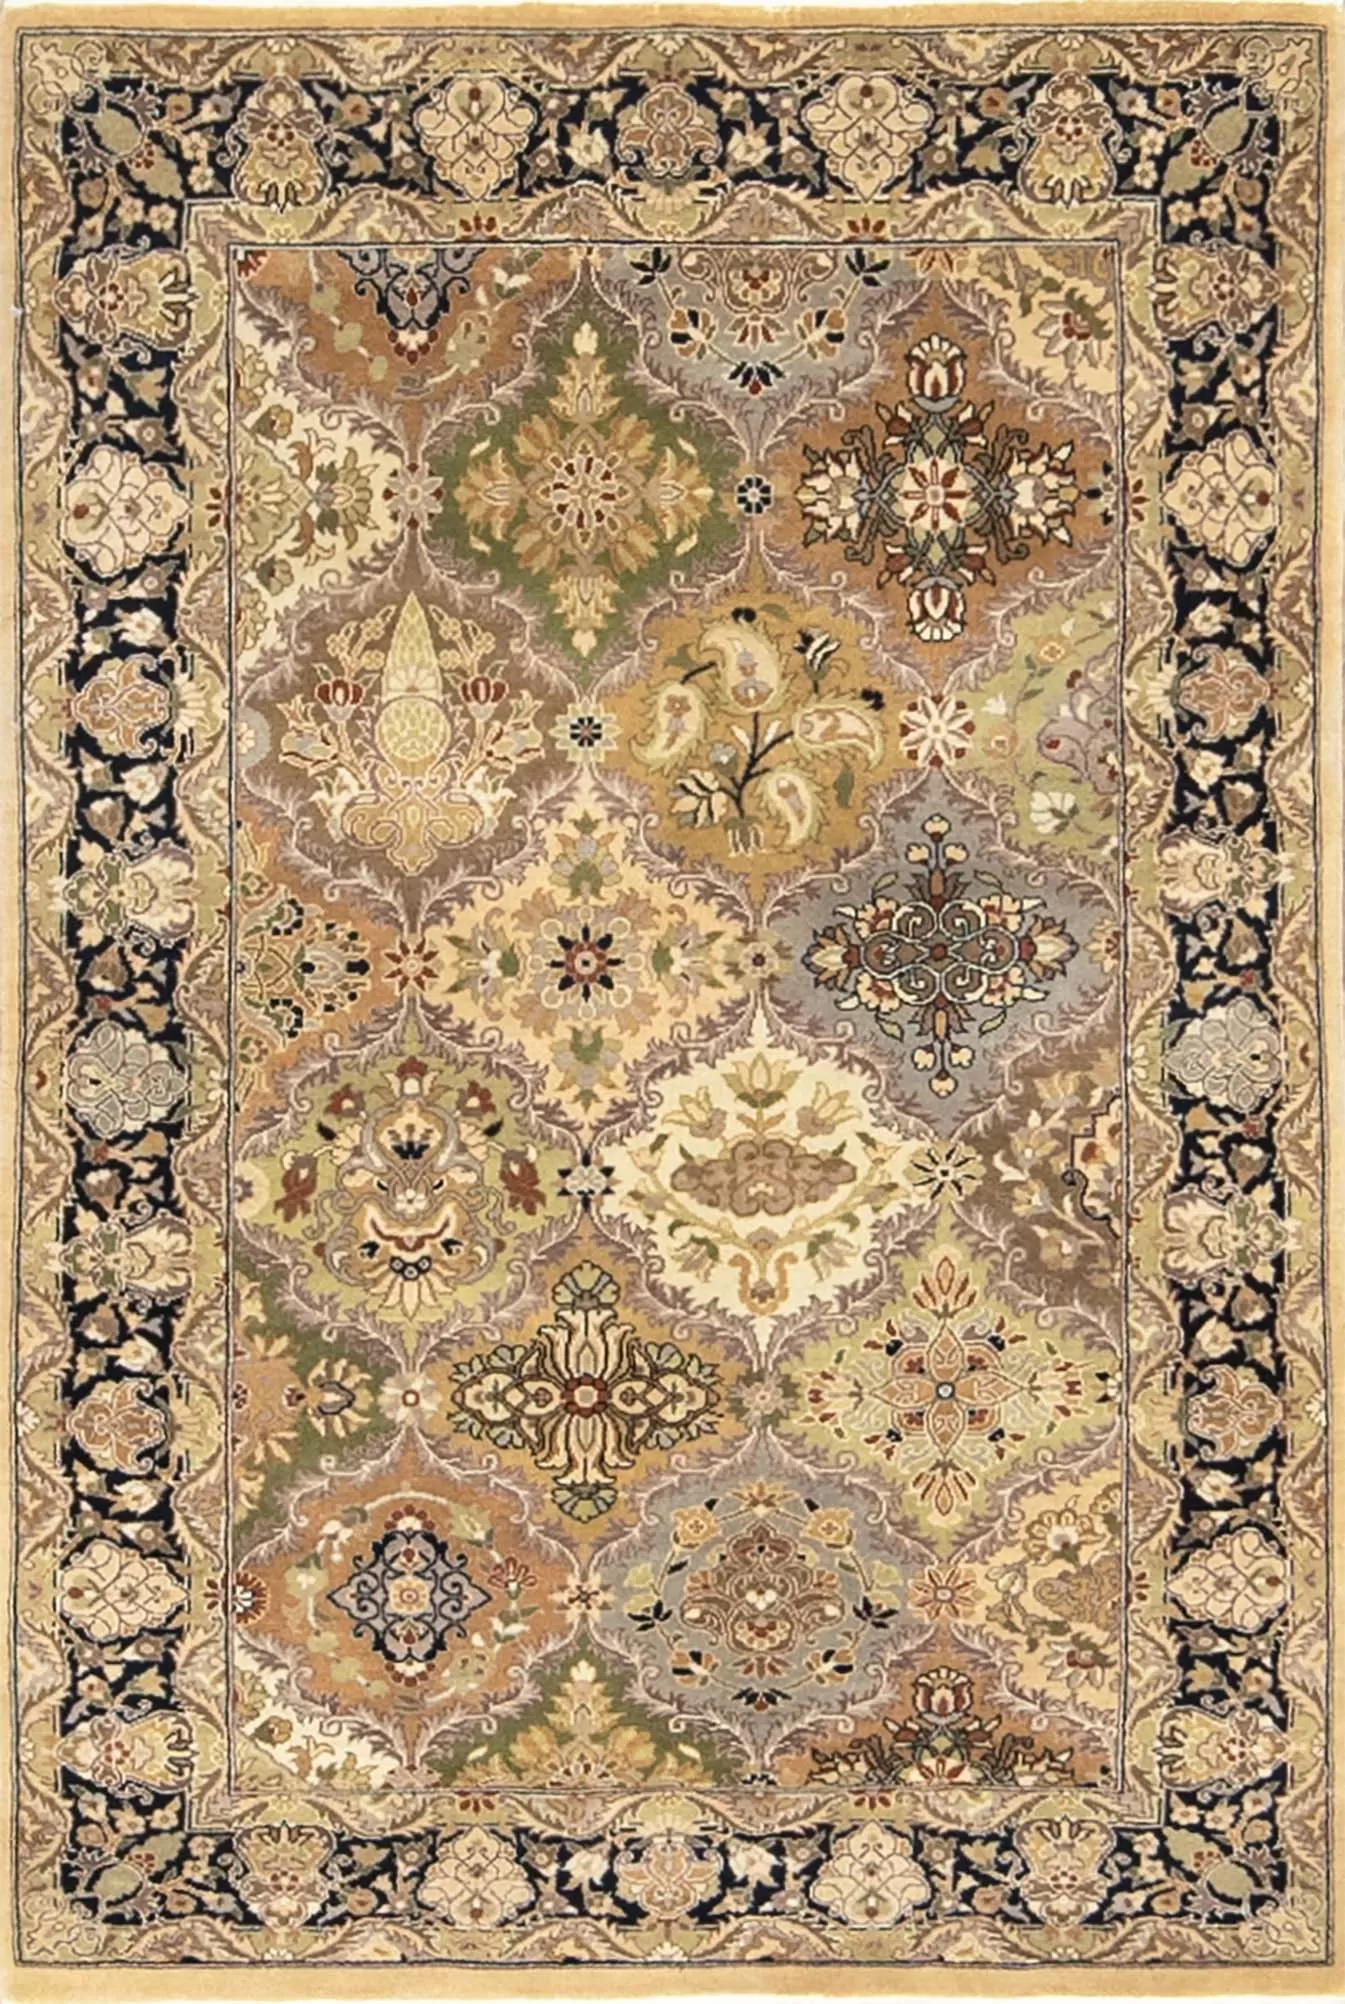 Oriental rug online. hand knotted wool oriental rug made in Pakistan with pastel and earth tone colors. Size 3.1x4.10.